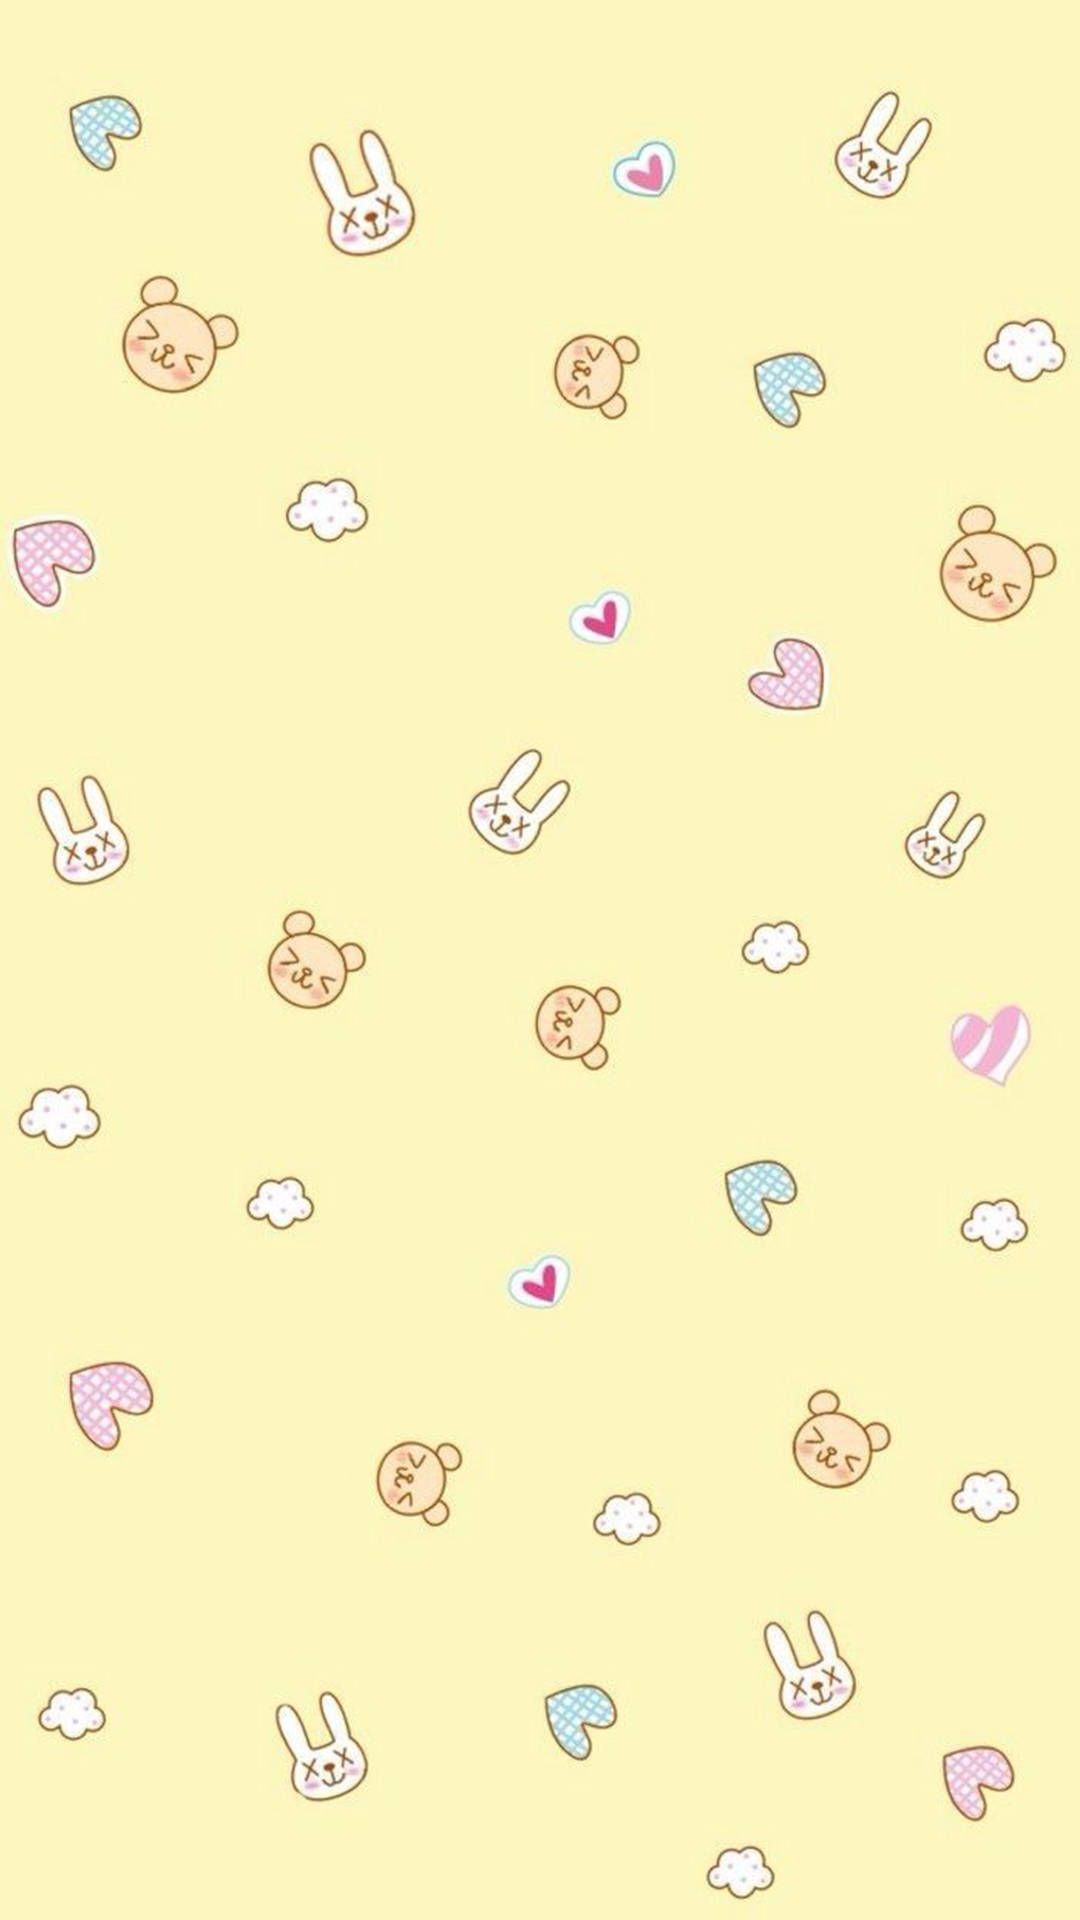 Kawaii wallpaper for phone and desktop. Find more on our website - Yellow, cute, pastel yellow